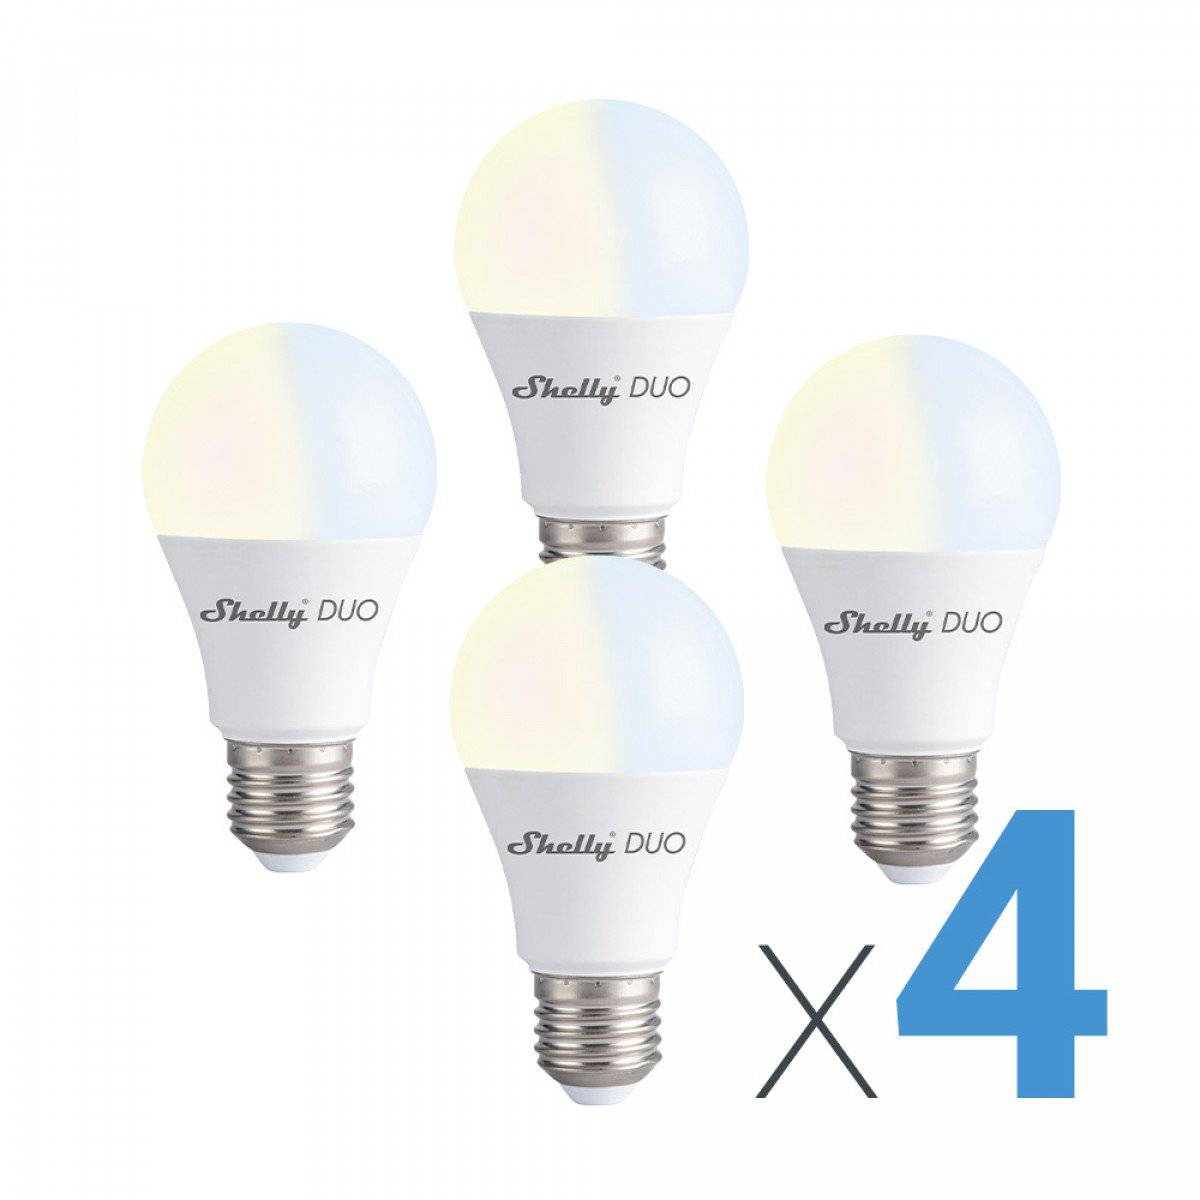 Shelly DUO Led Bulb Viererpack - Casmarto